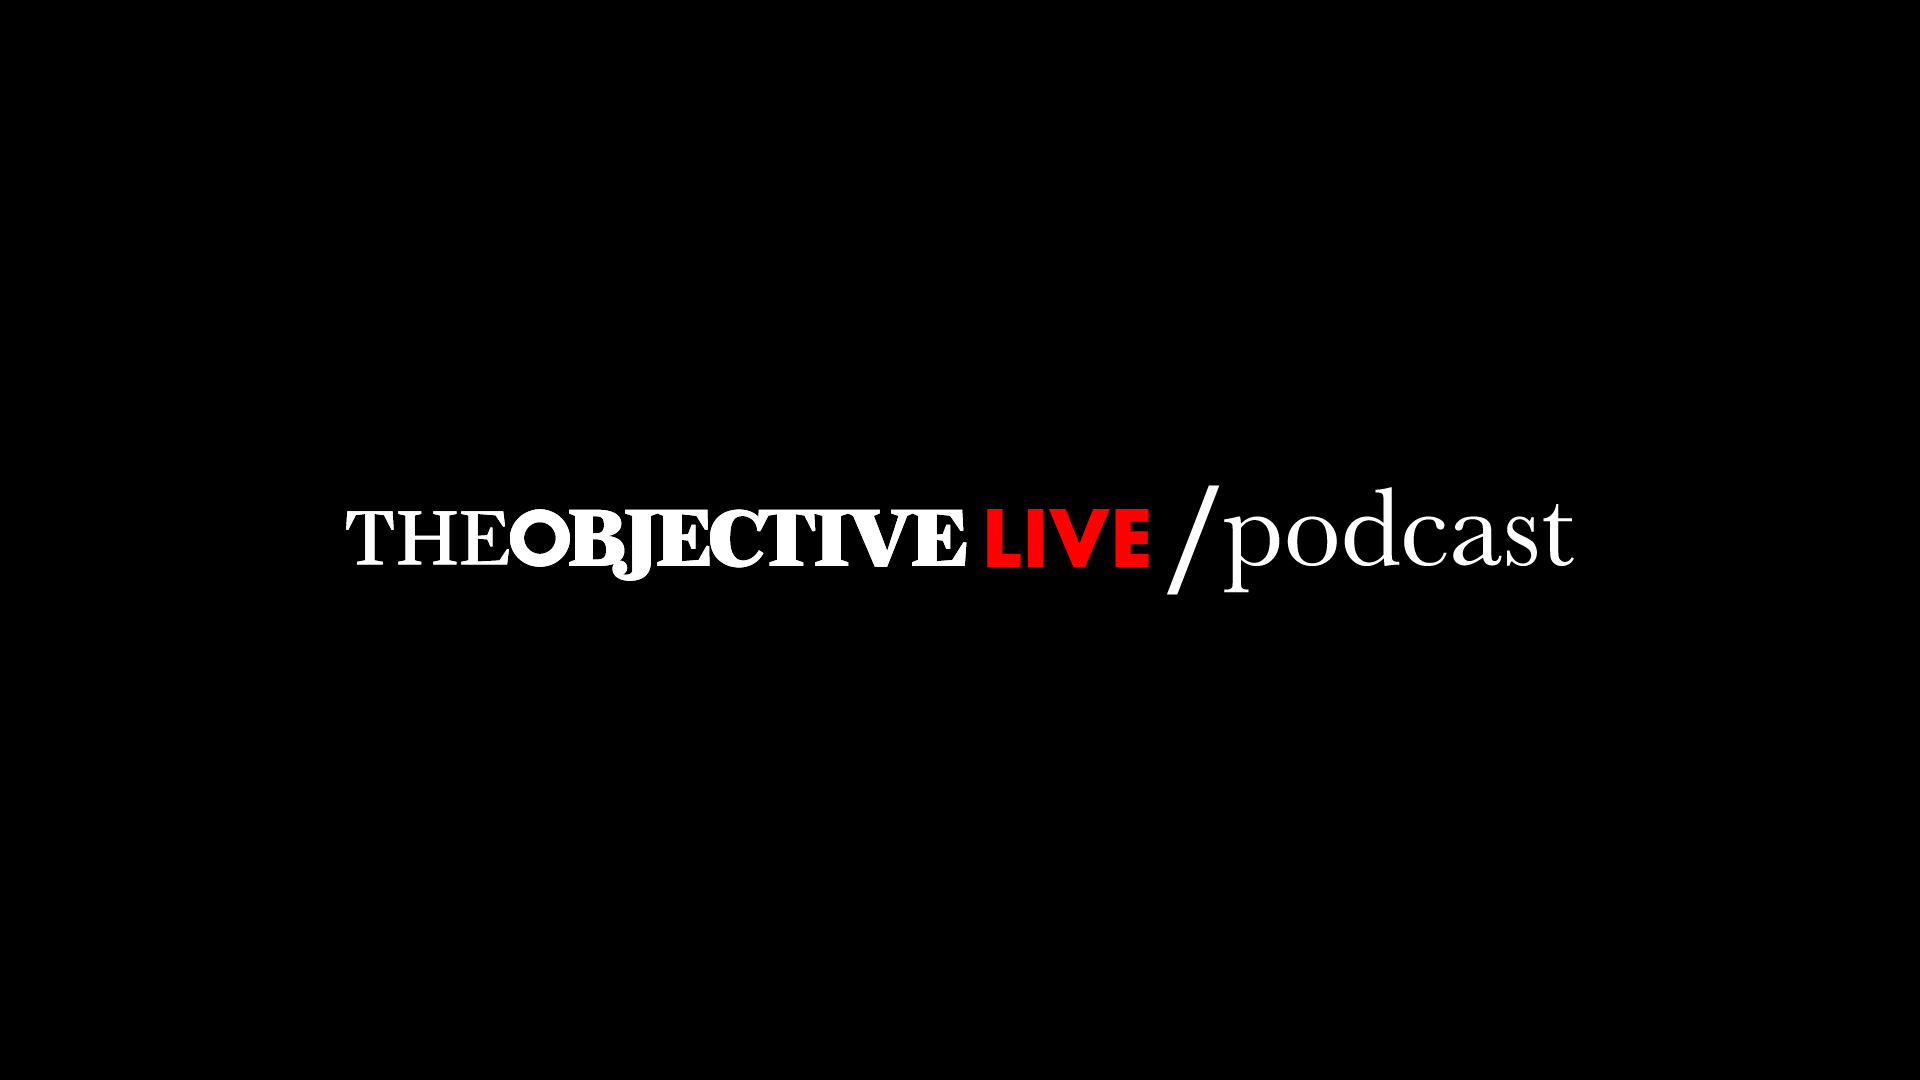 ¿Qué son nuestros The Objective LIVE Podcast?